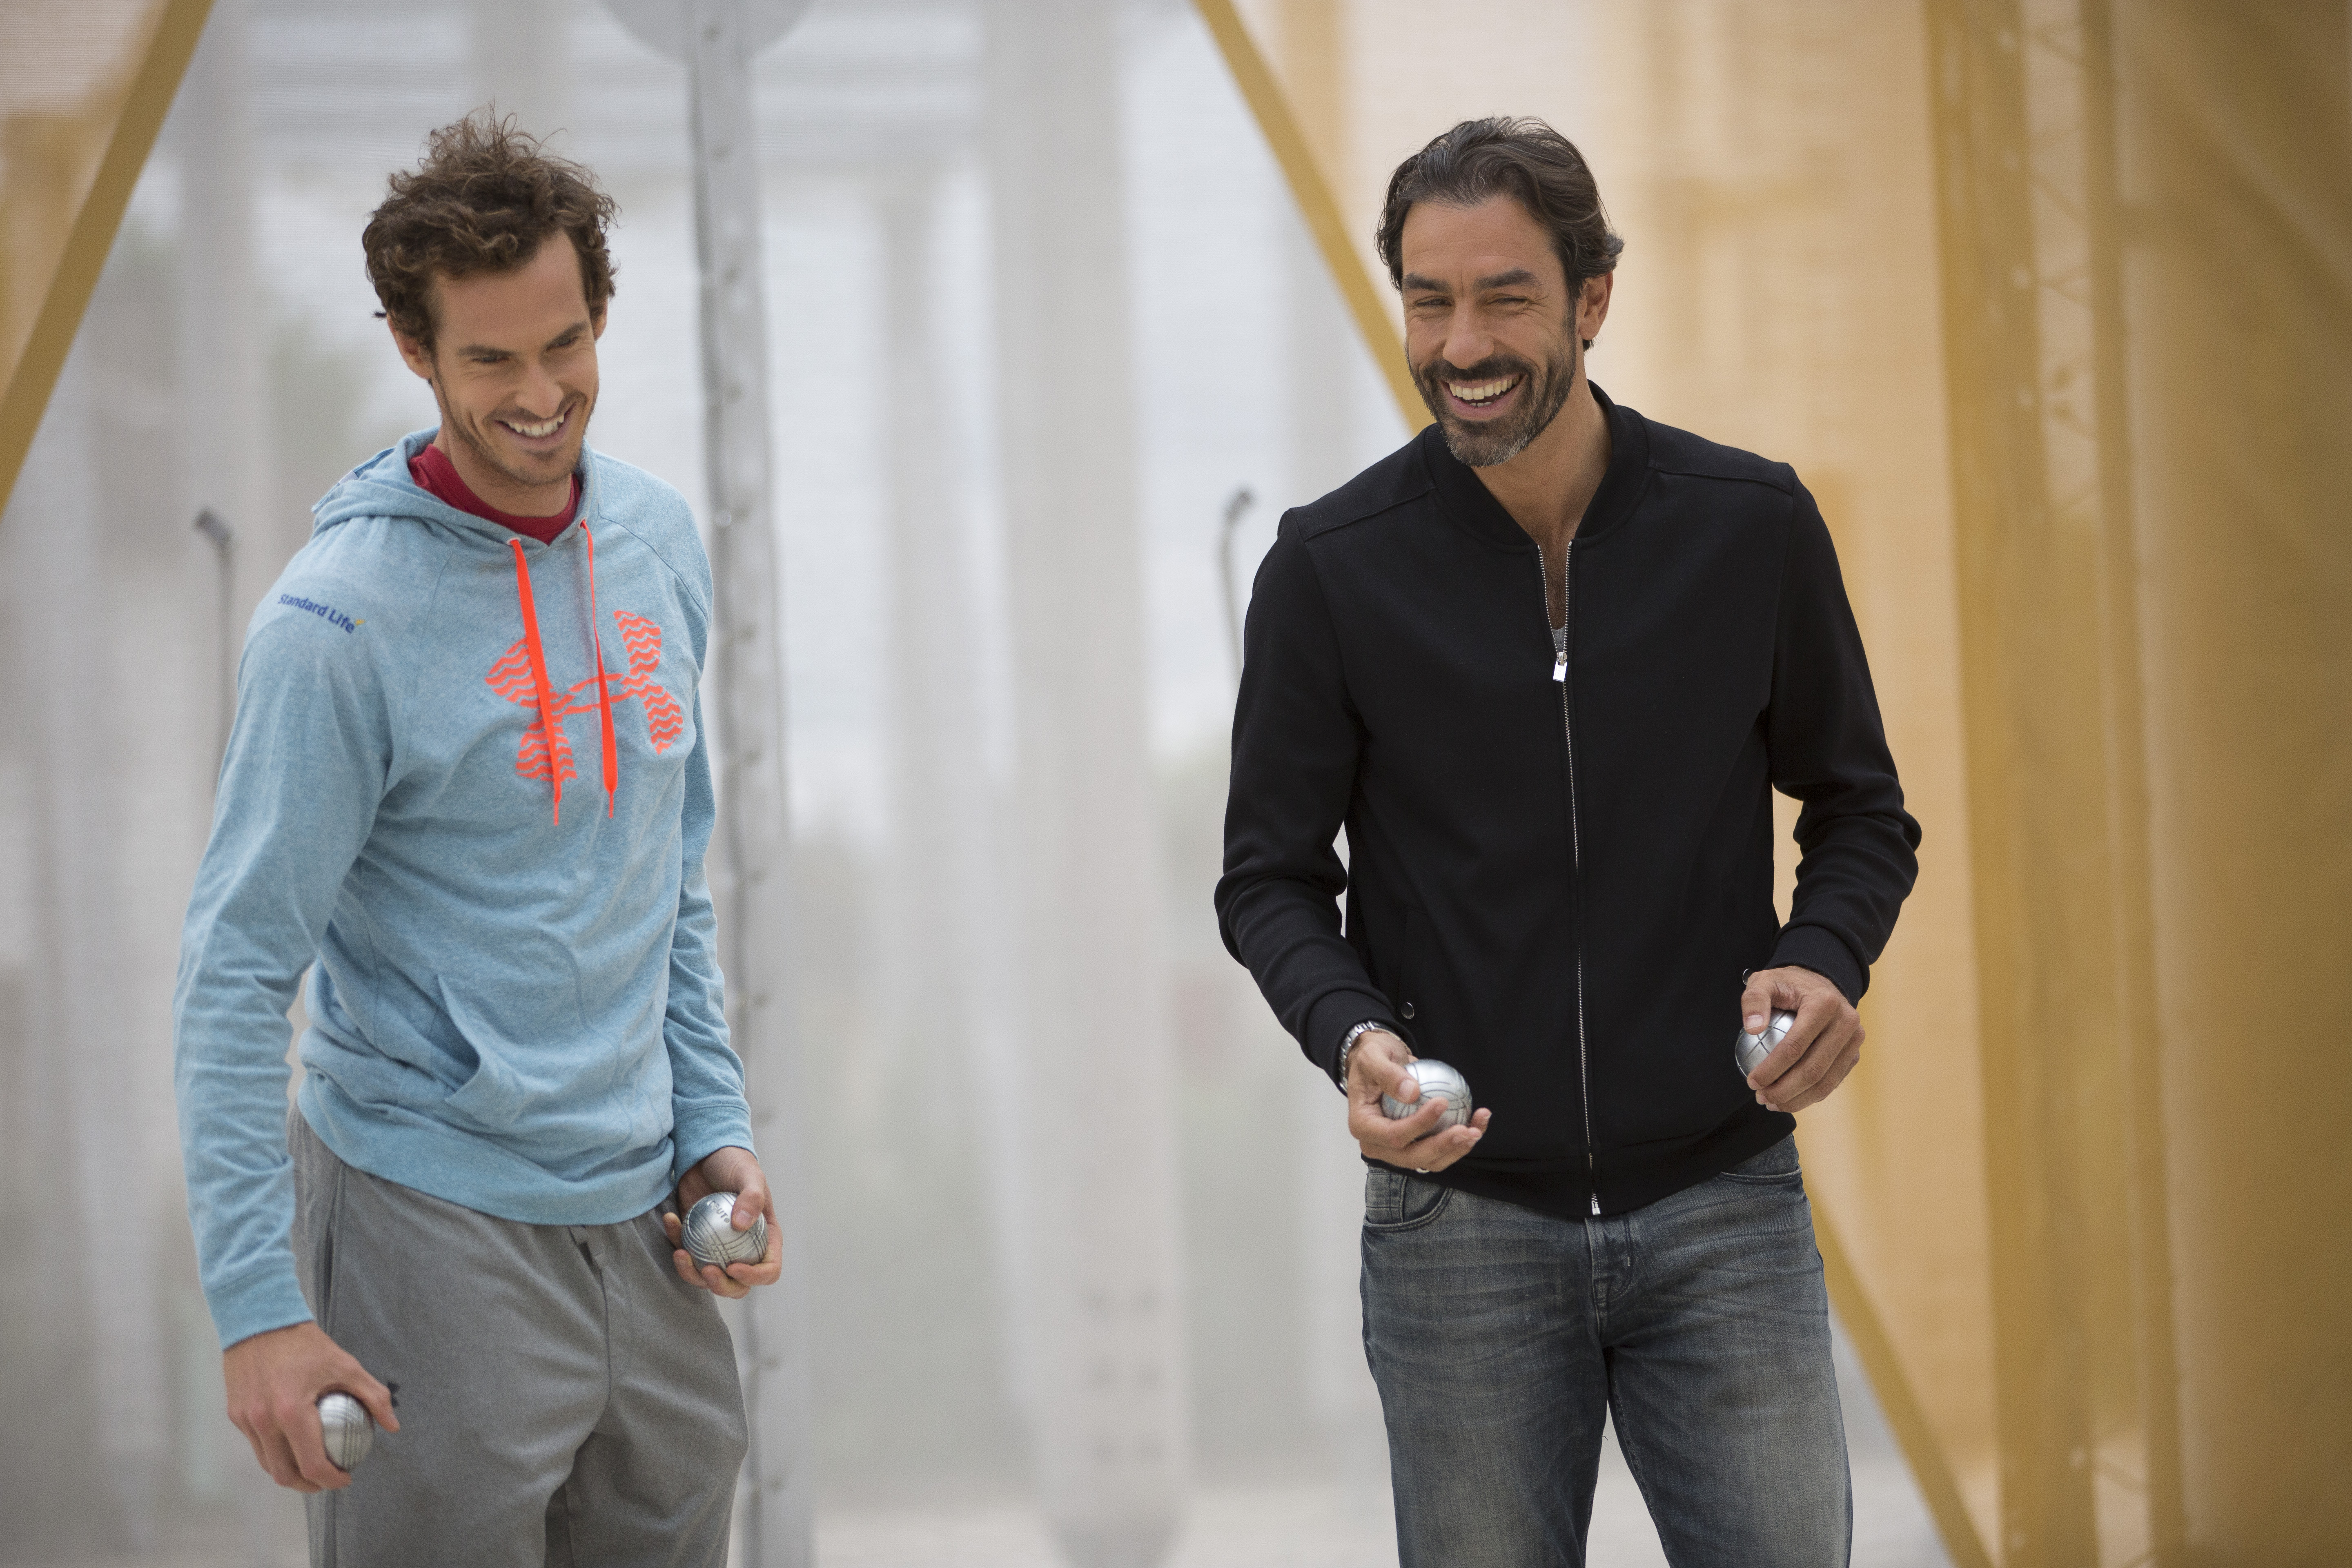 Tennis player Andy Murray and former France and Arsenal footballer Robert Pires play petanque at the Stade Alain Mimoun, Paris on 18th May 2016